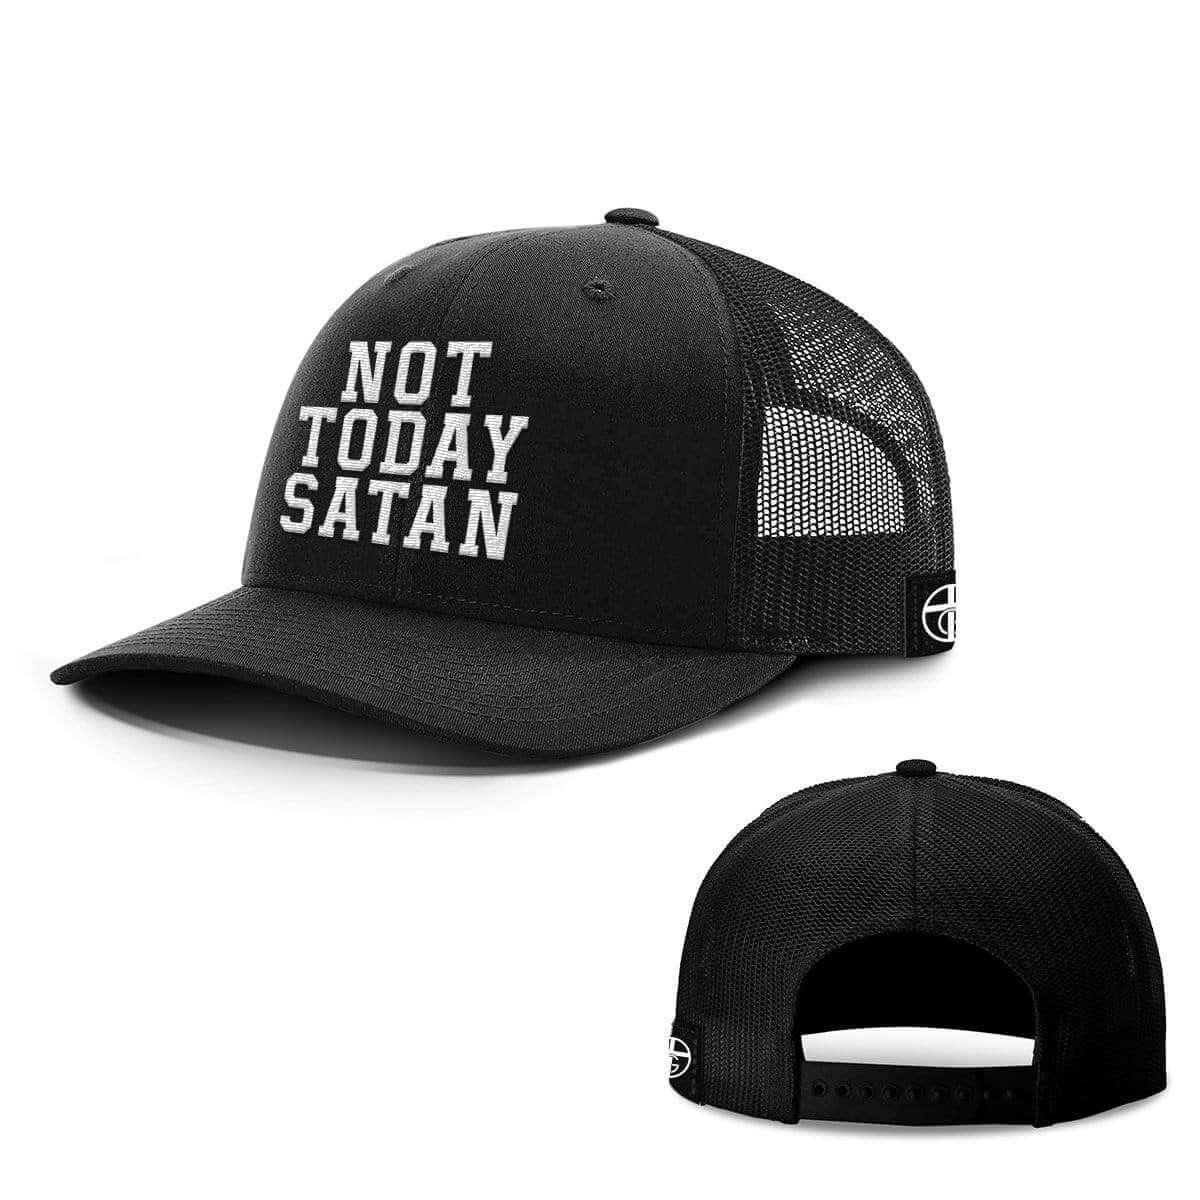 Not Today Satan Hats - Our True God